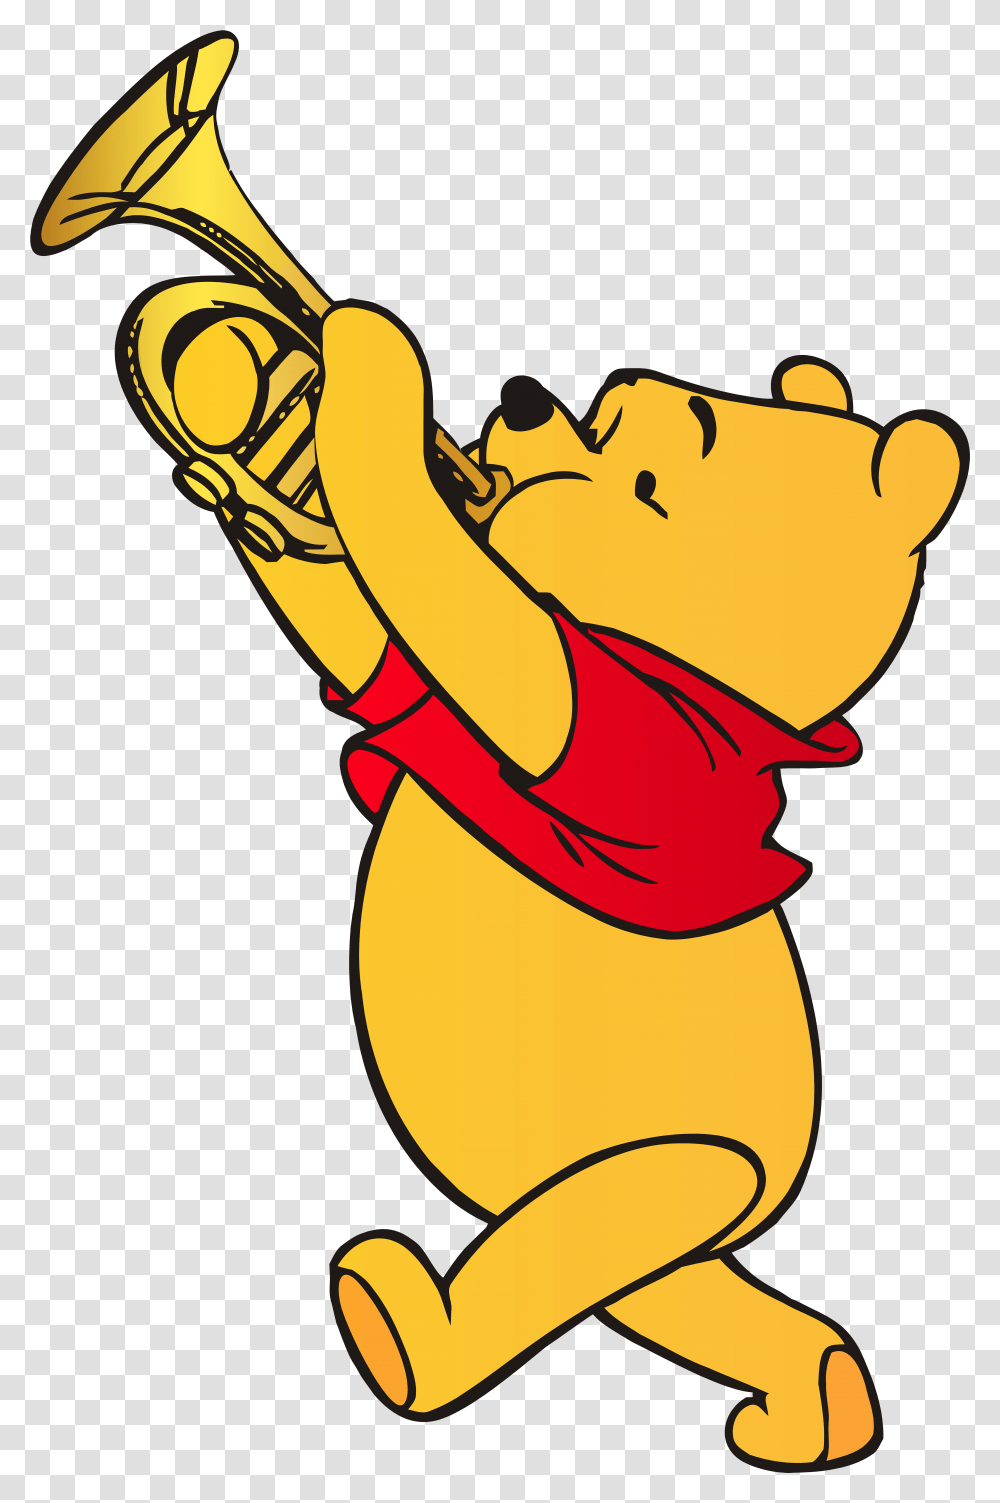 Winnie The Pooh Clipart Background Winnie The Pooh, Worship, Prayer, Flare, Light Transparent Png